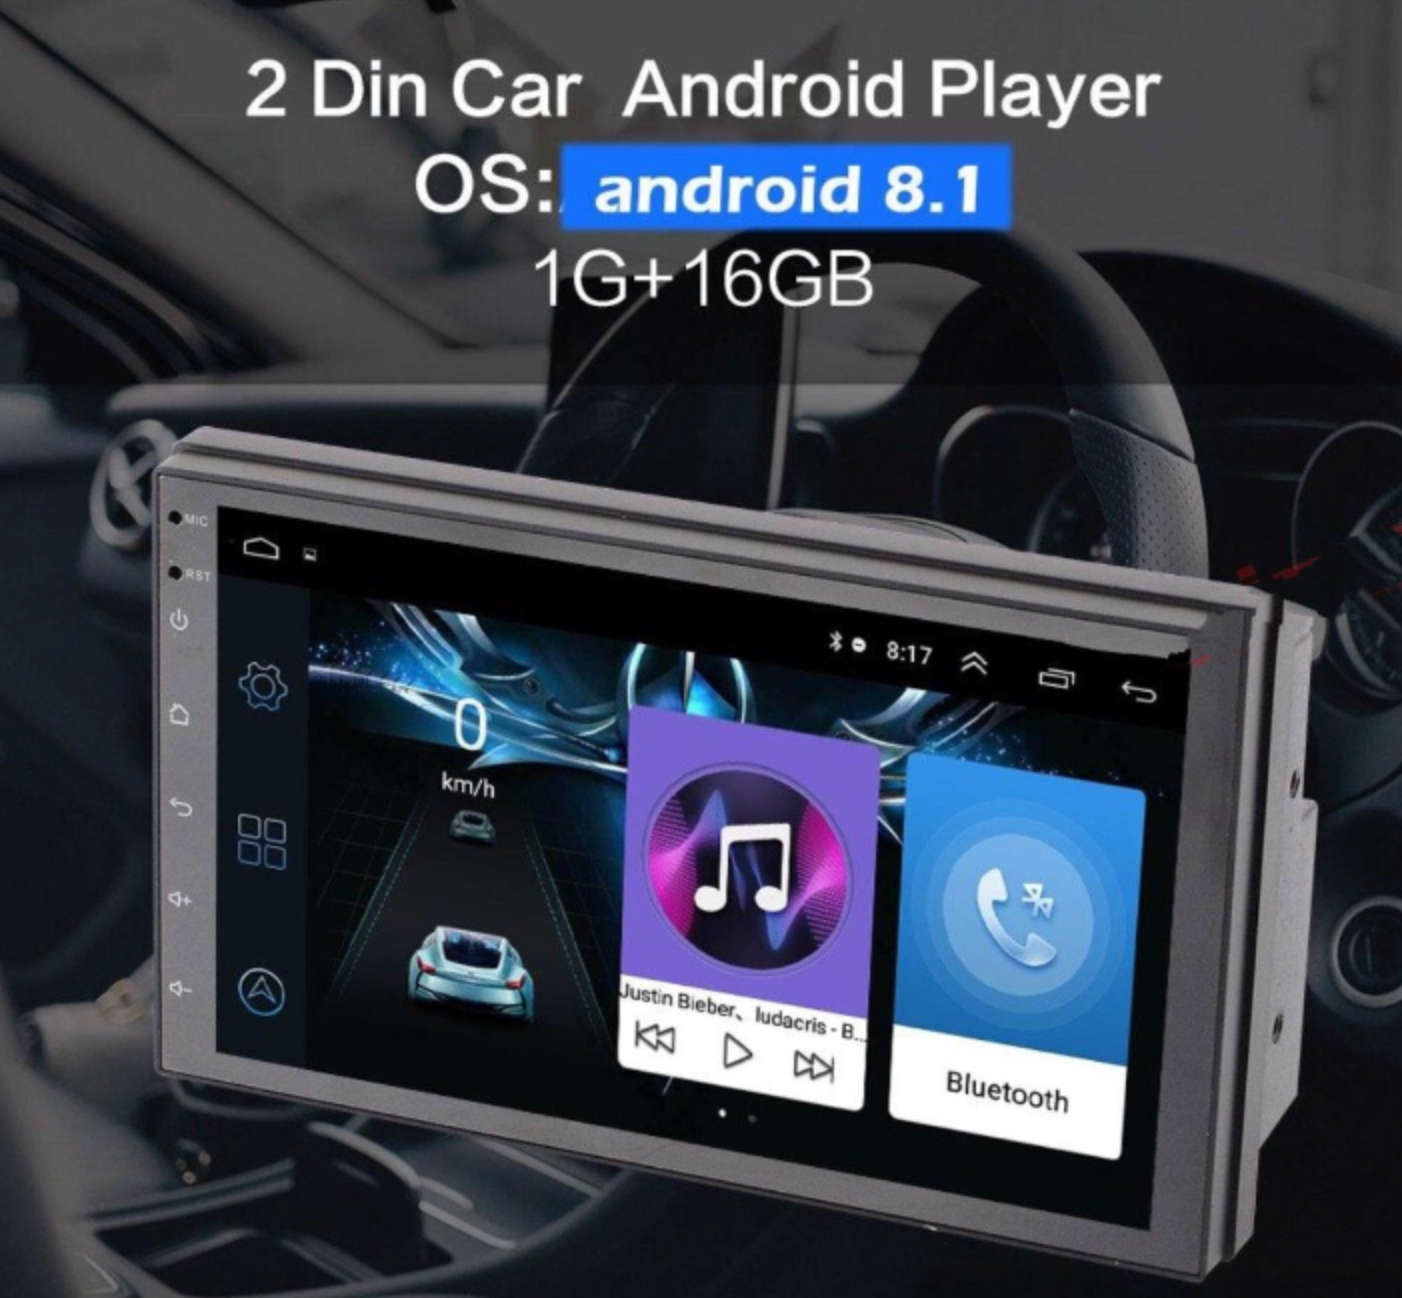 Android 8.1 Car Stereo 2 DIN 7” + Compatible with Toyota Harness, GPS Navigation, Bluetooth, USB